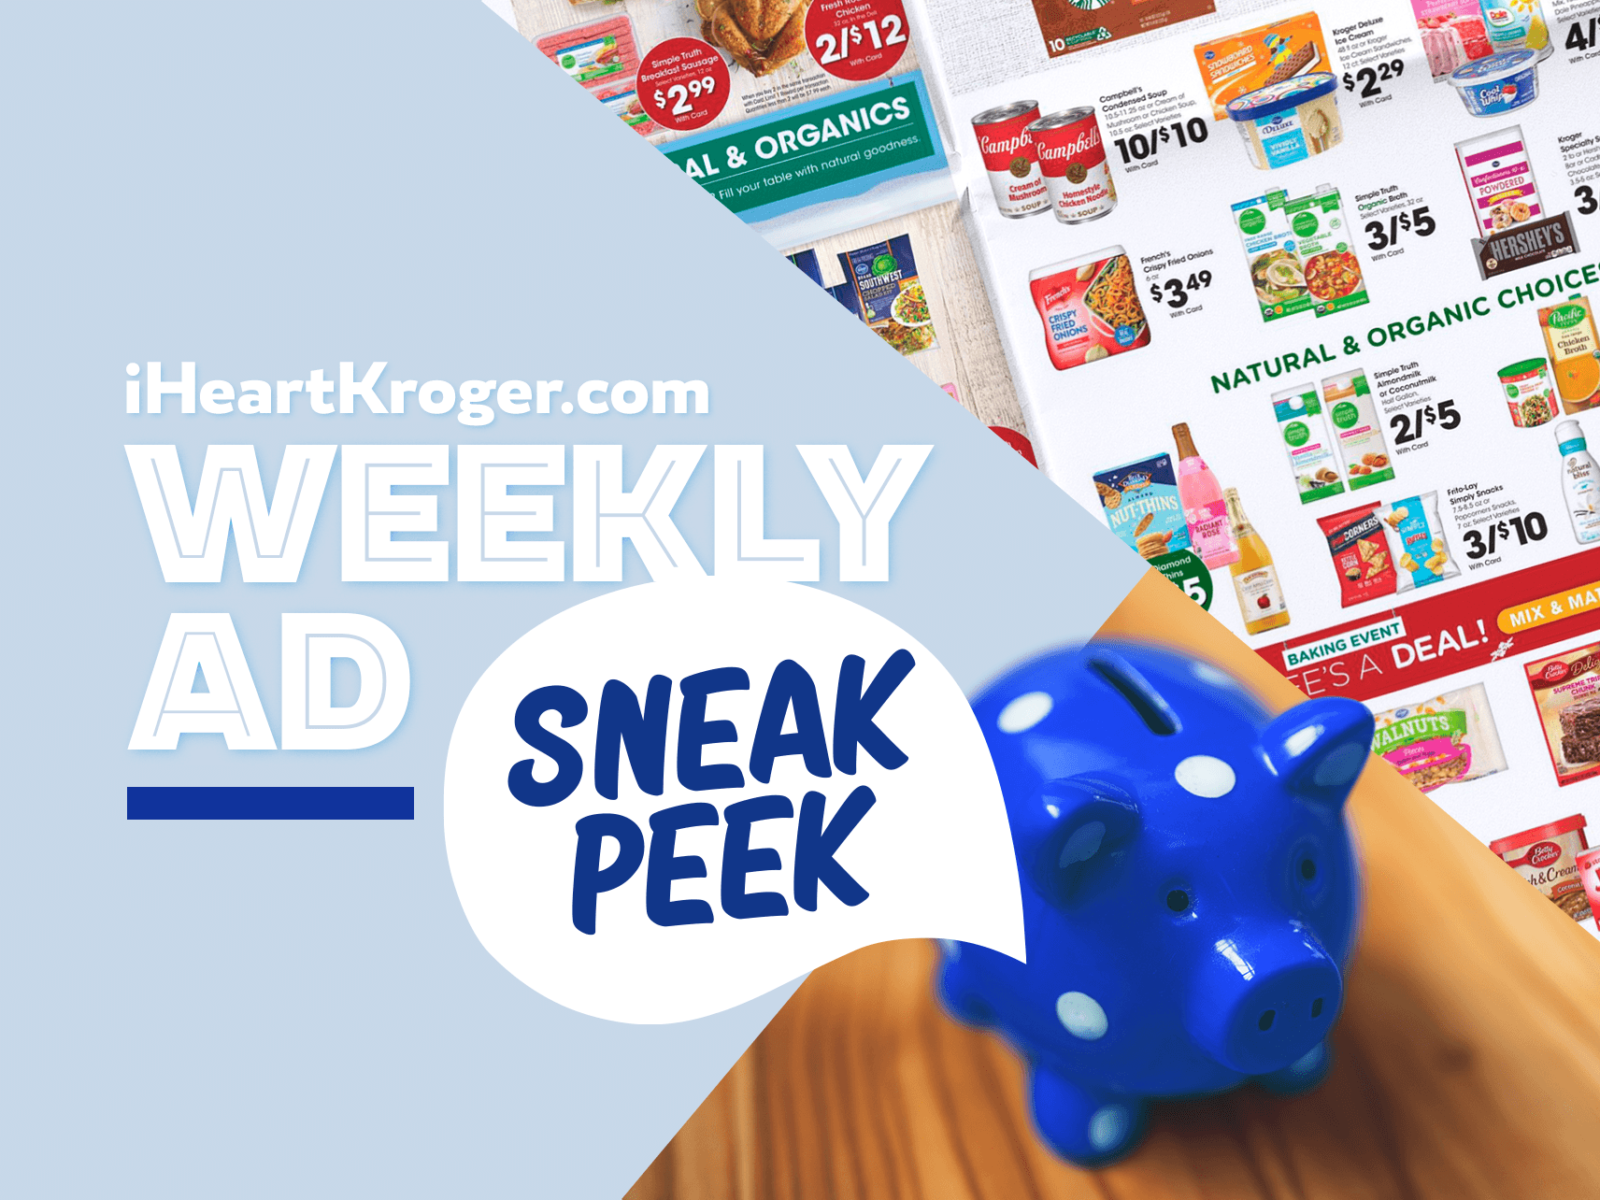 Kroger Ad & Coupons Week Of 4/12 to 4/18